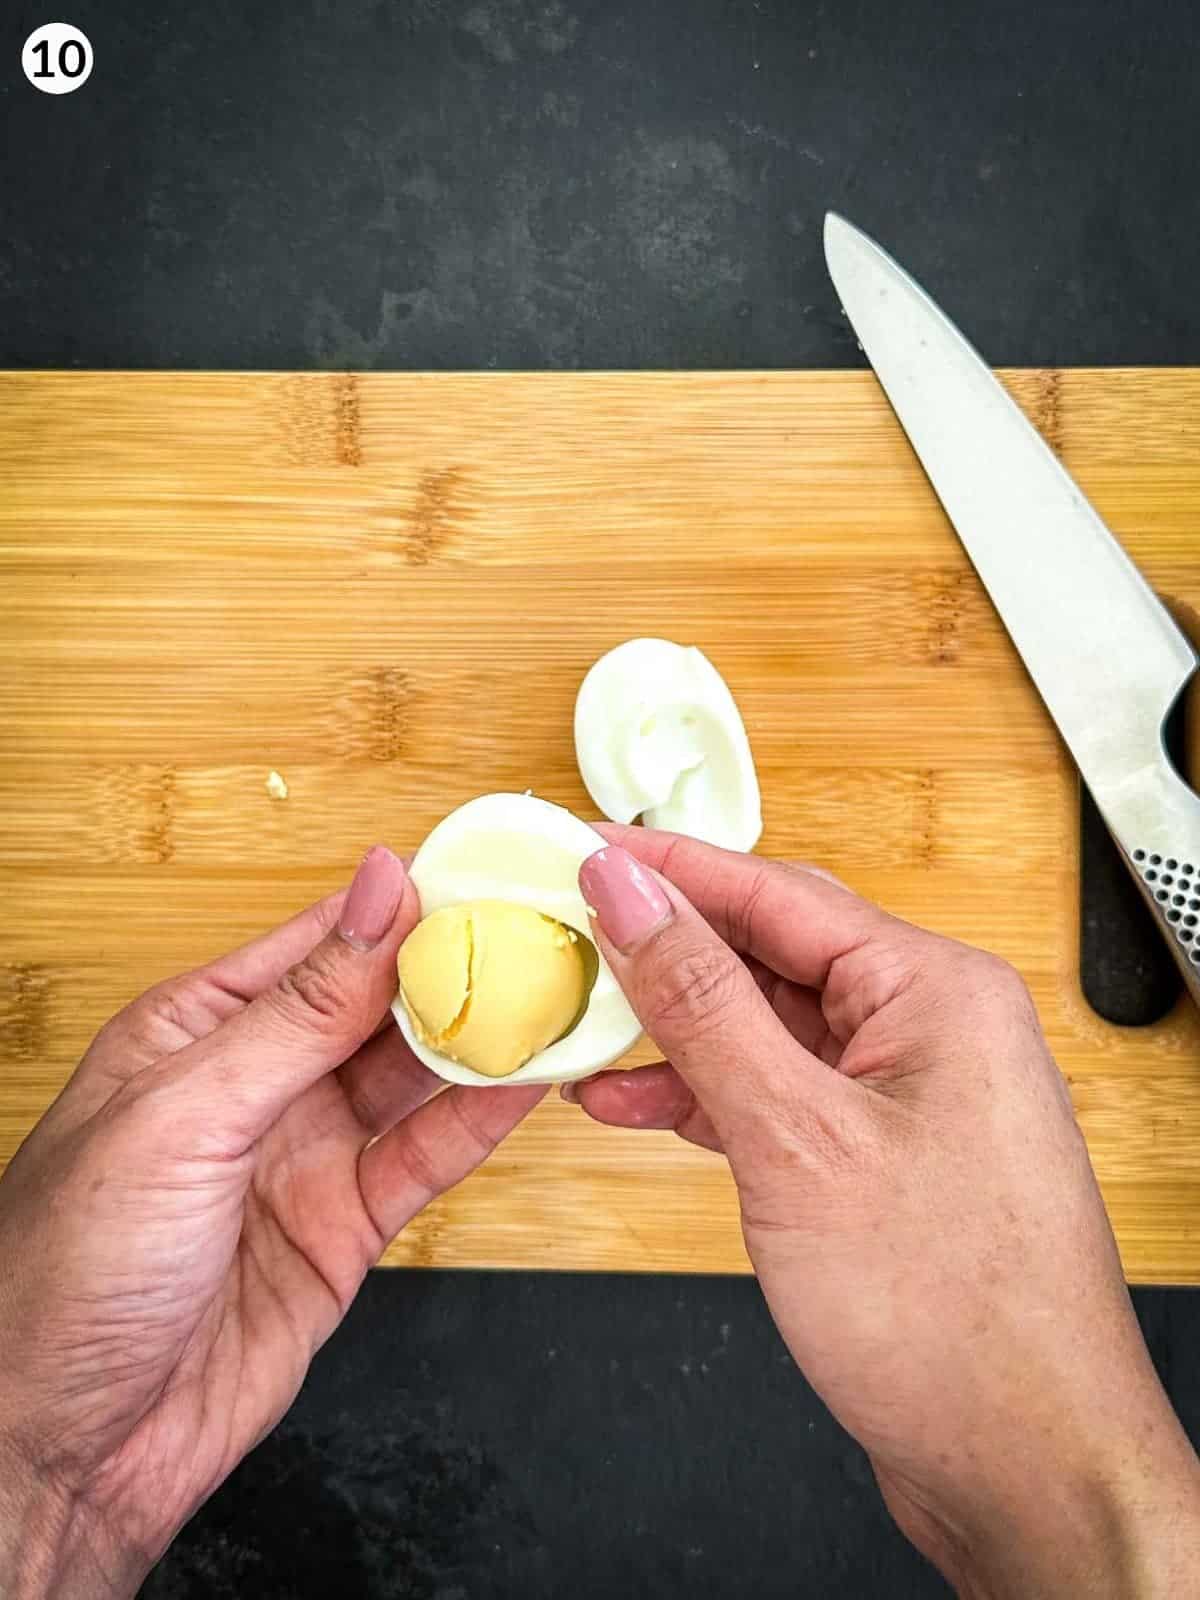 Removing egg yolk from the egg white over a wooden chopping board